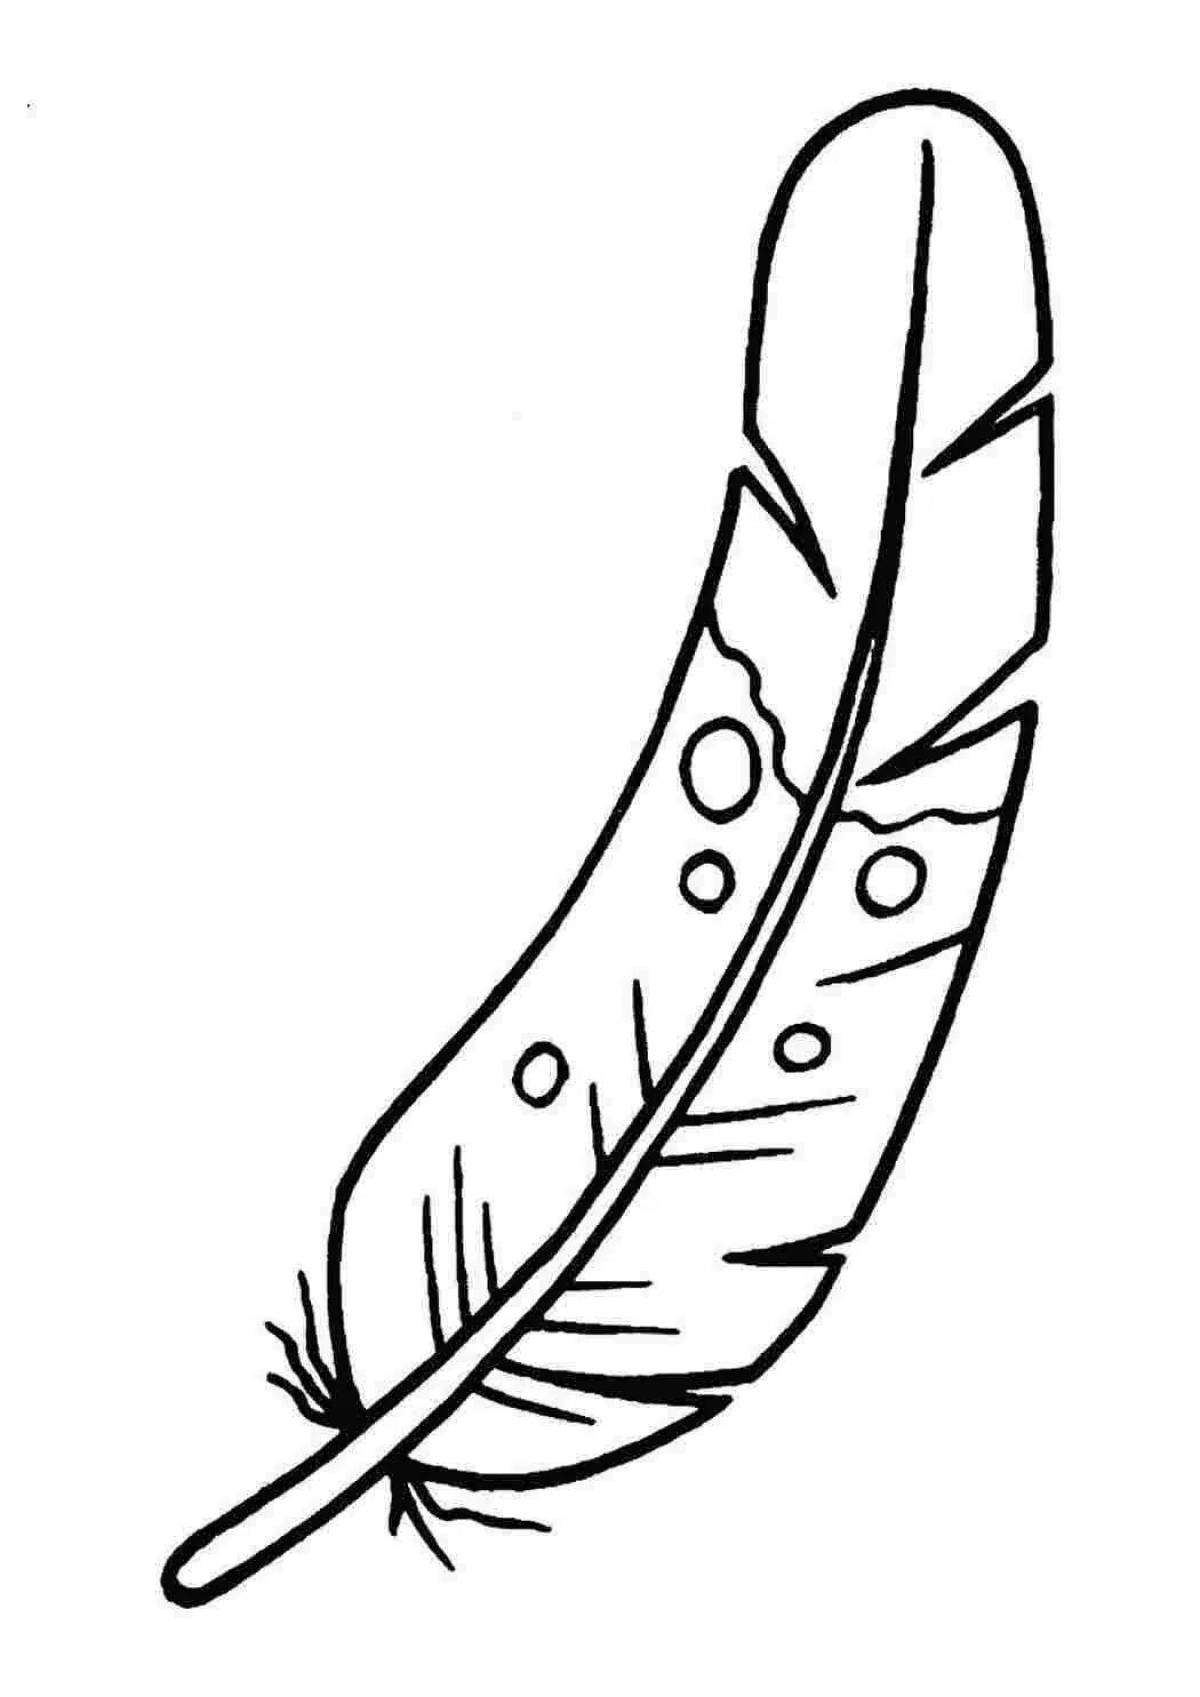 Coloring page exquisite pattern with feathers